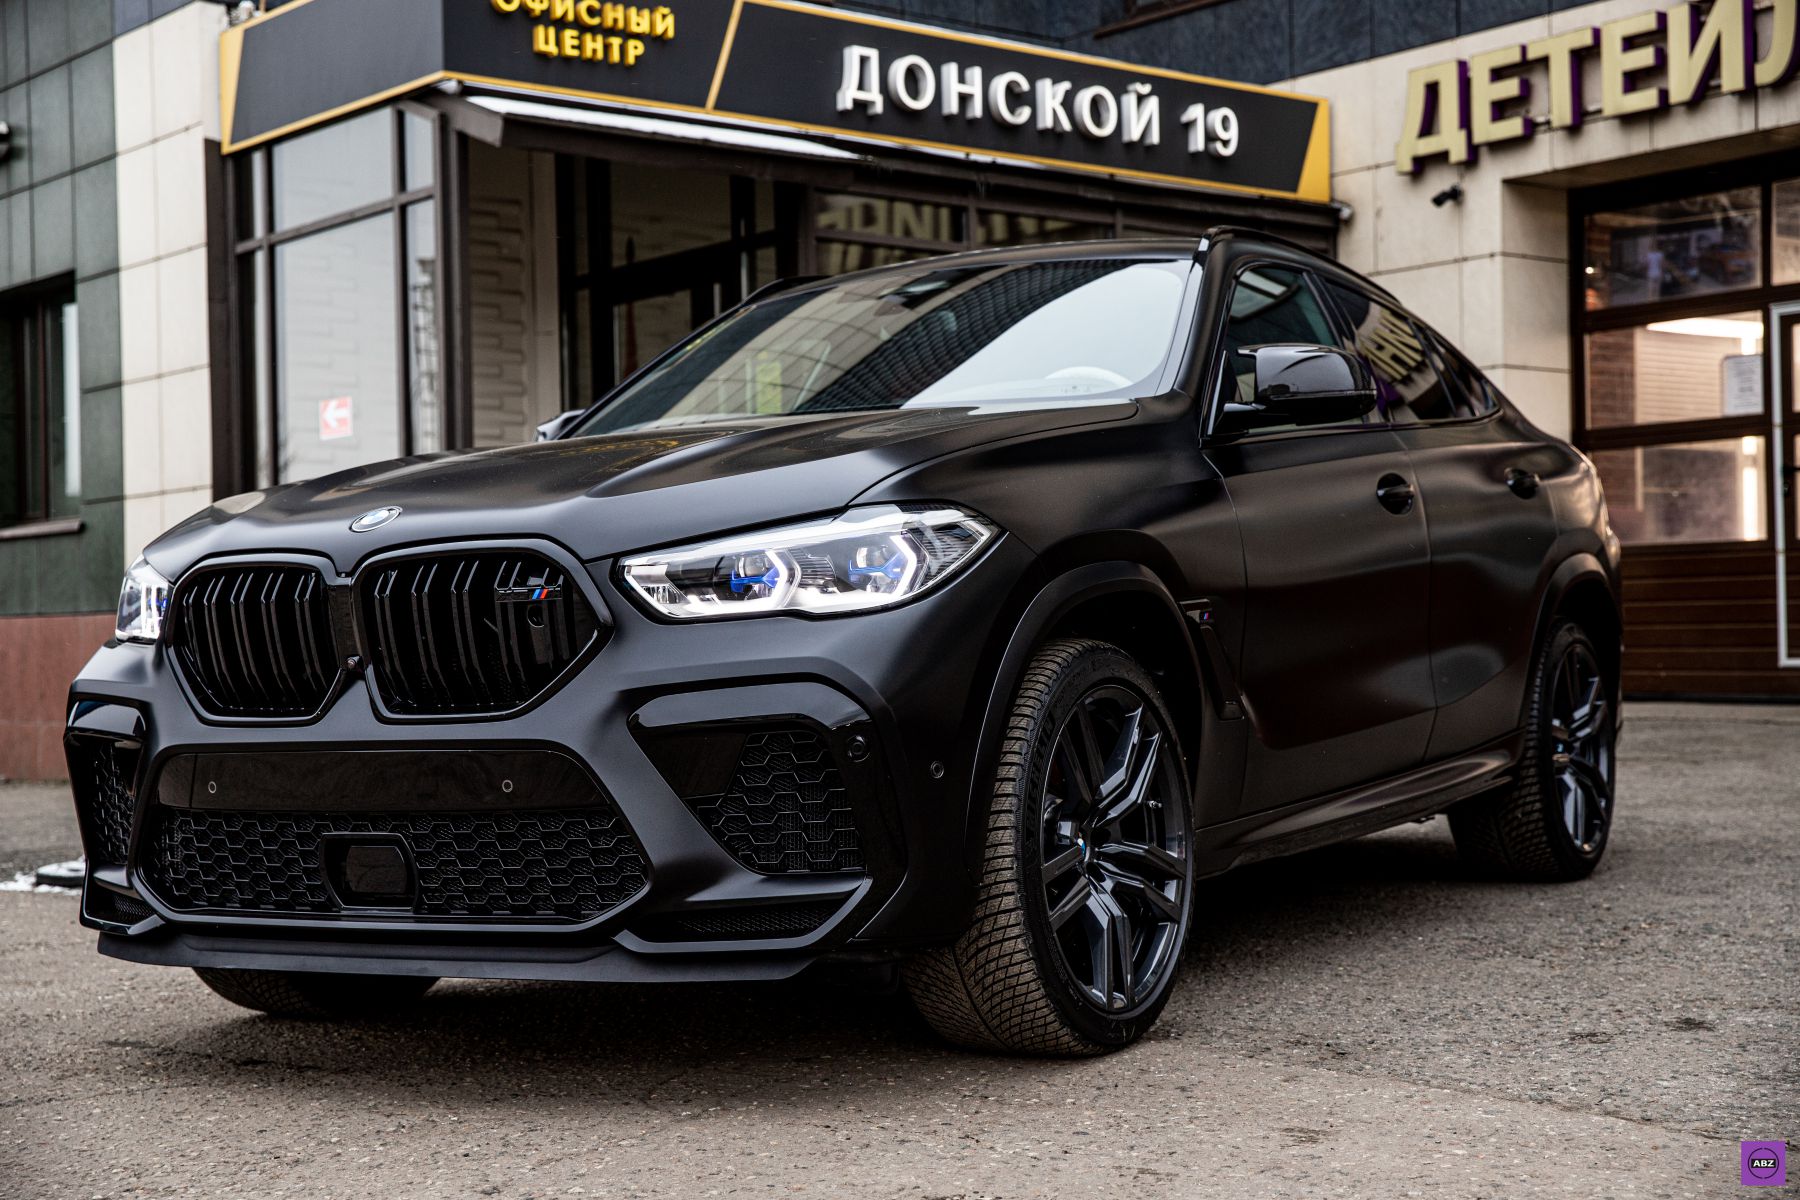 X6 competition. BMW x6m 2020 Competition черный. BMW x6 m Competition черная. BMW x6m черный матовый. BMW x6m Competition матовый.